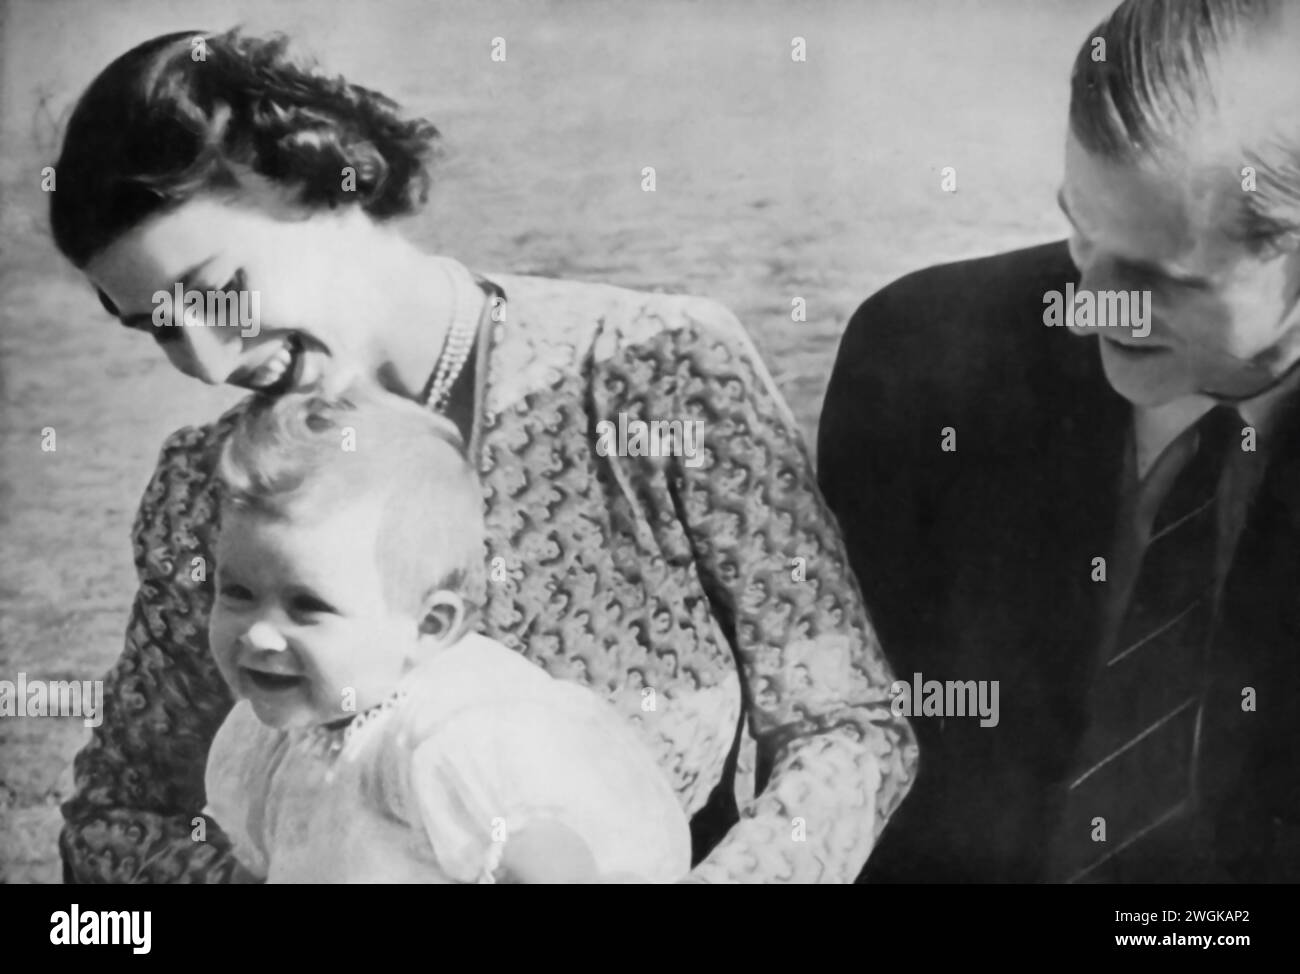 Photograph of a young Charles III seated on the lap of his mother, Elizabeth II, with his father, Prince Philip, seated beside them. This family portrait, likely taken in the early 1950s, shows the future King Charles III in his early childhood, alongside his parents before Elizabeth's ascension to the throne in 1952. The image captures a personal moment in the life of the royal family, before Elizabeth and Philip's roles as queen and consort were fully realized. Stock Photo